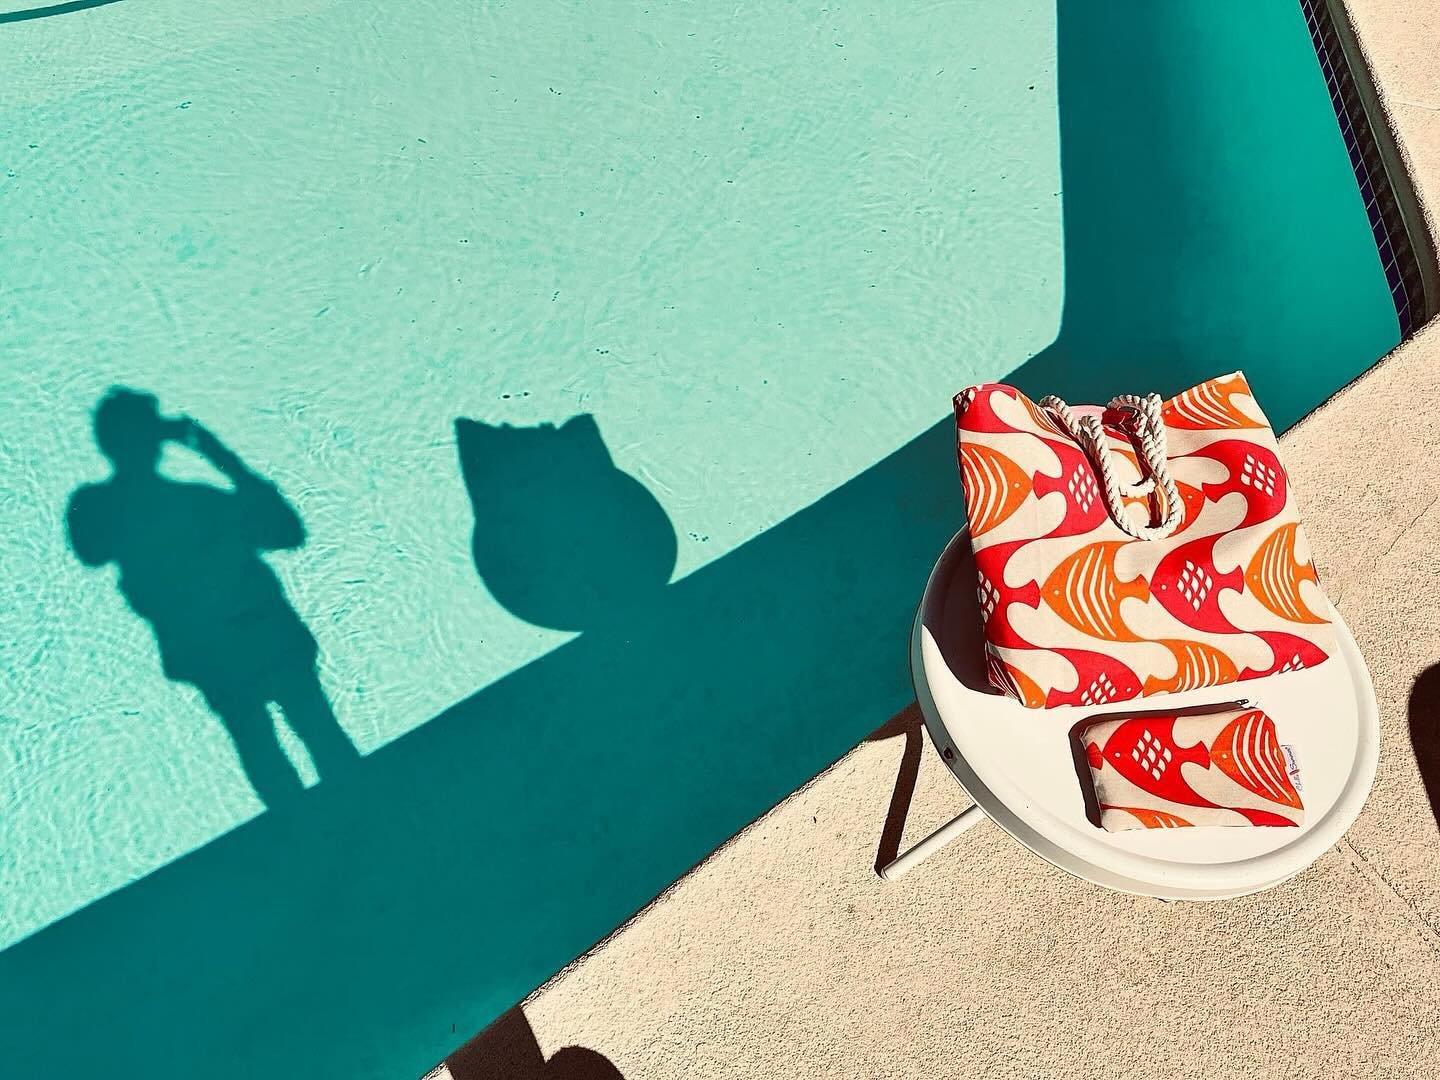 Happy Wednesday!

#palmspringsstyle #fishyfishy #poolside #may #boutique #boutiqueshopping #boutiquestyle #chellesummer #chellesummerstyle #handbag #handmade #mystyle #summerstyle #shadows #style #instastyle #poolstyle #beachstyle